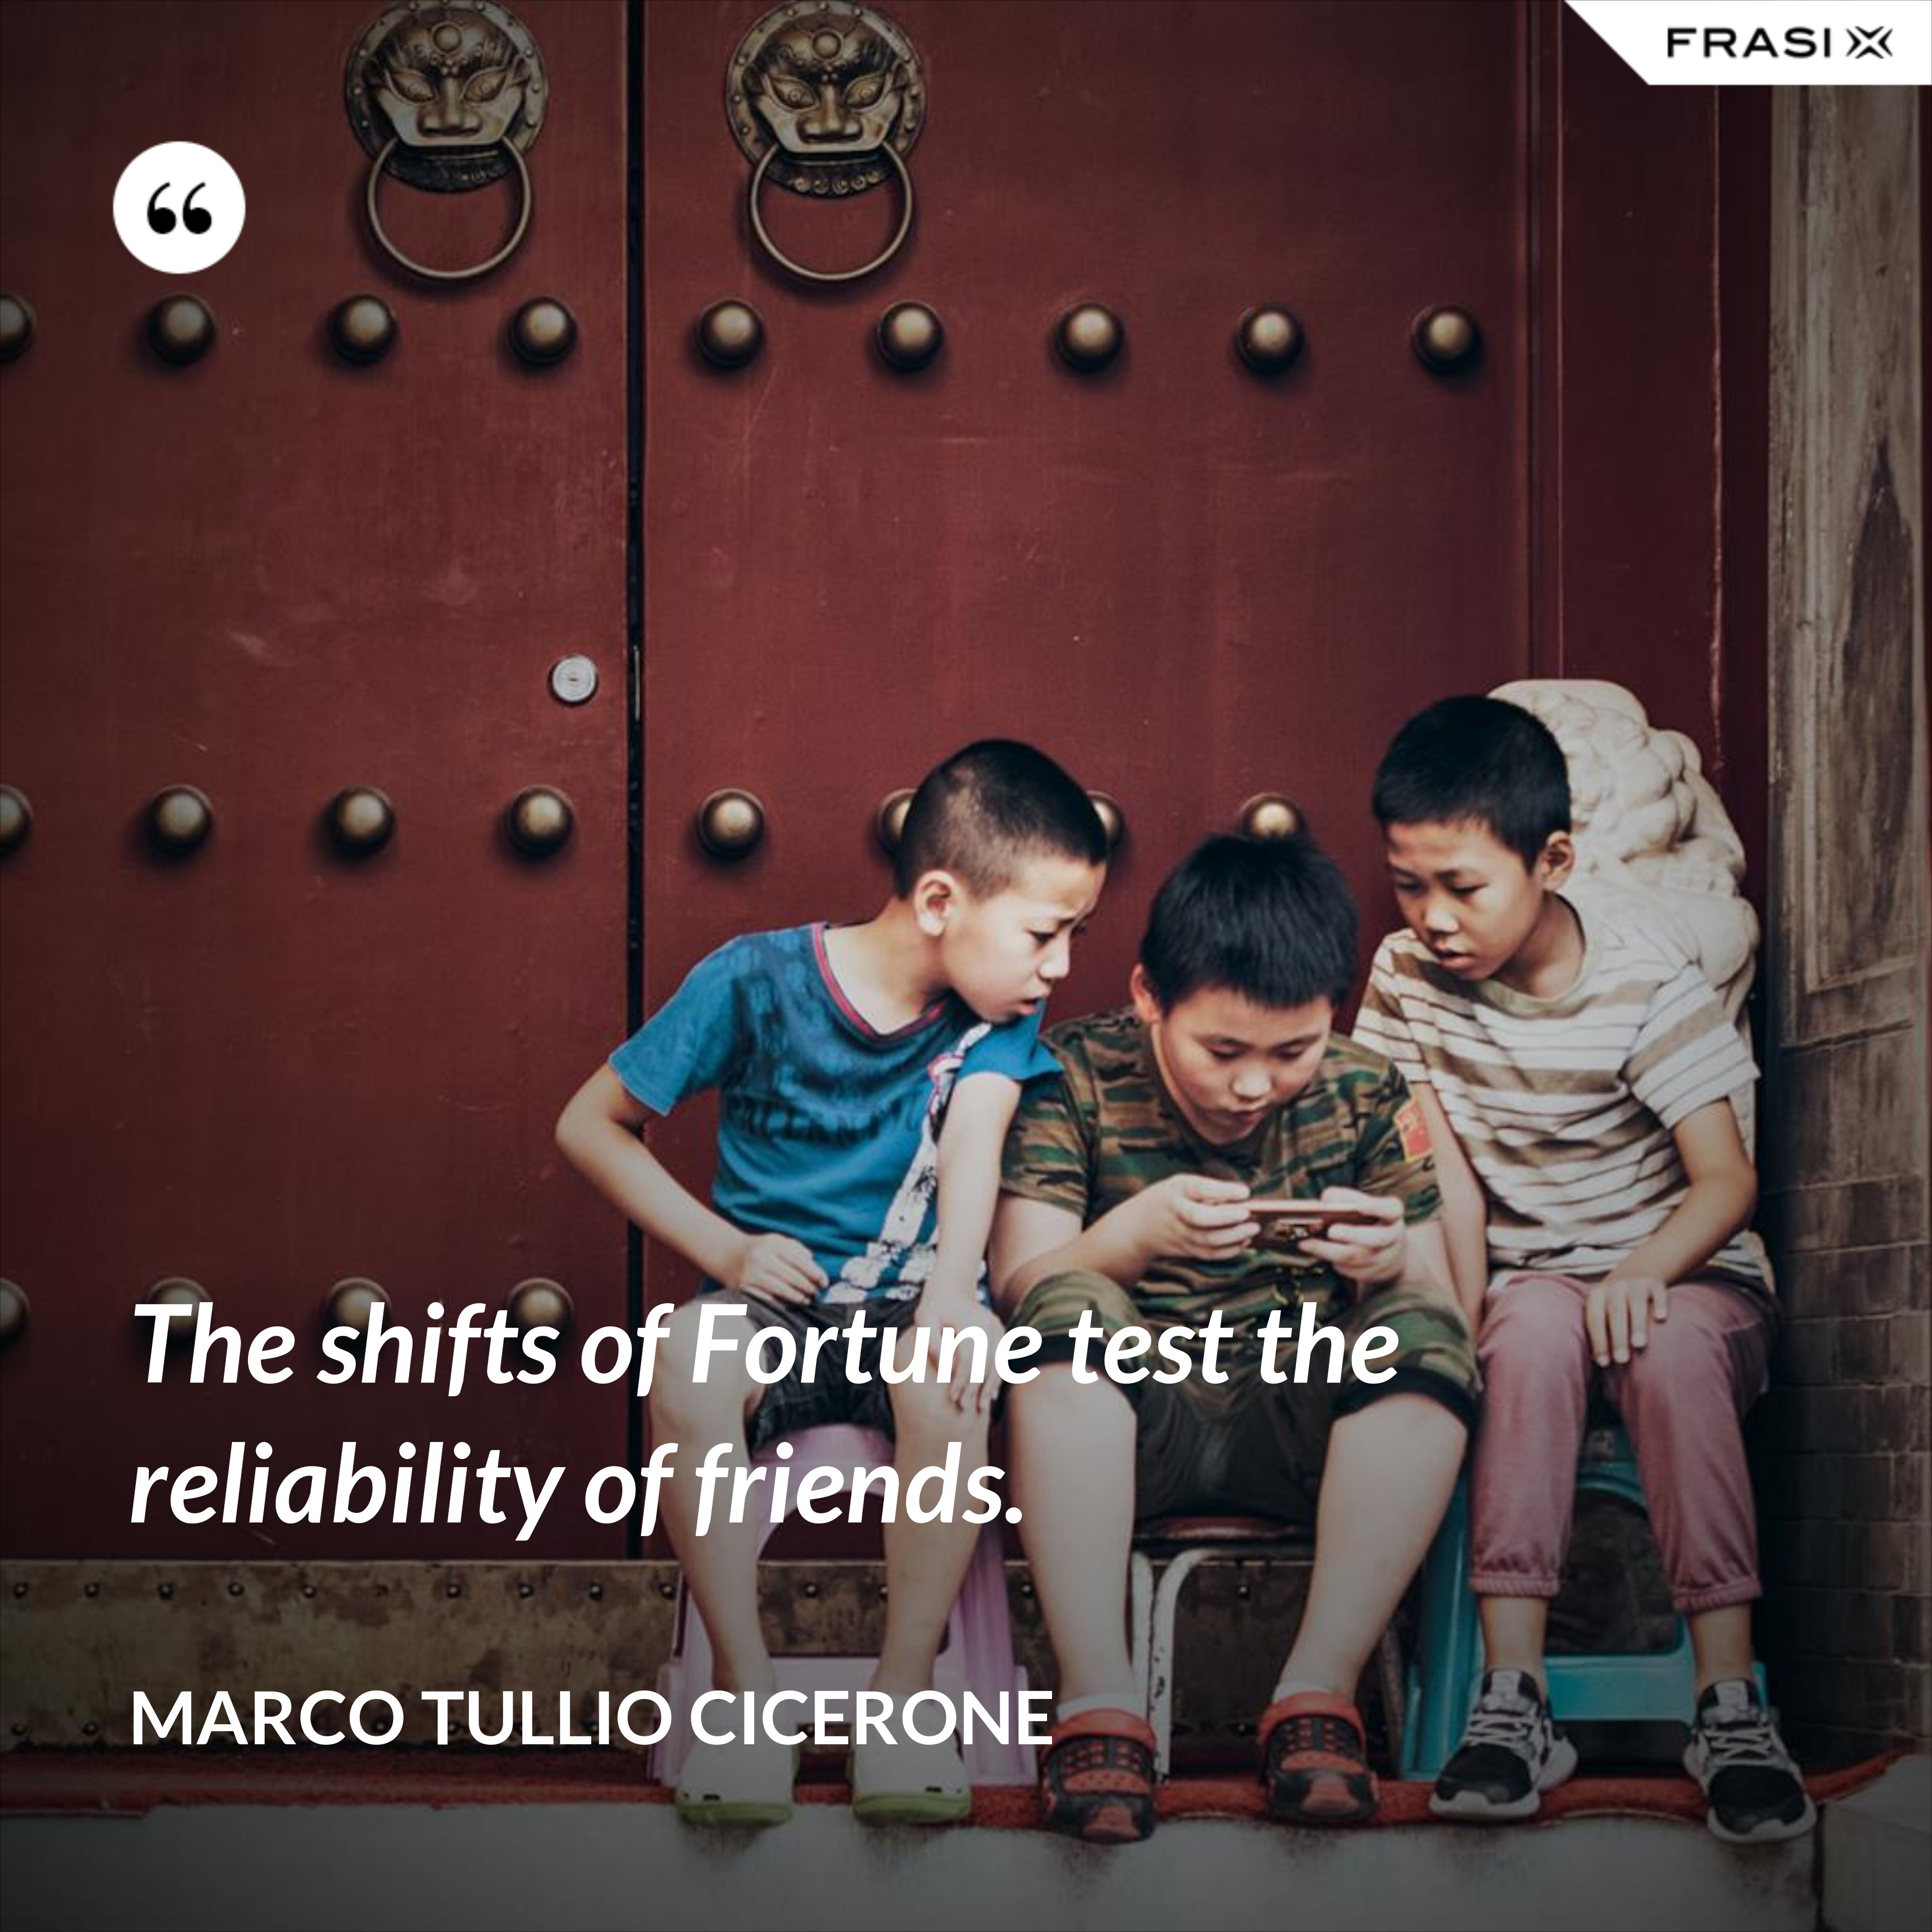 The shifts of Fortune test the reliability of friends. - Marco Tullio Cicerone